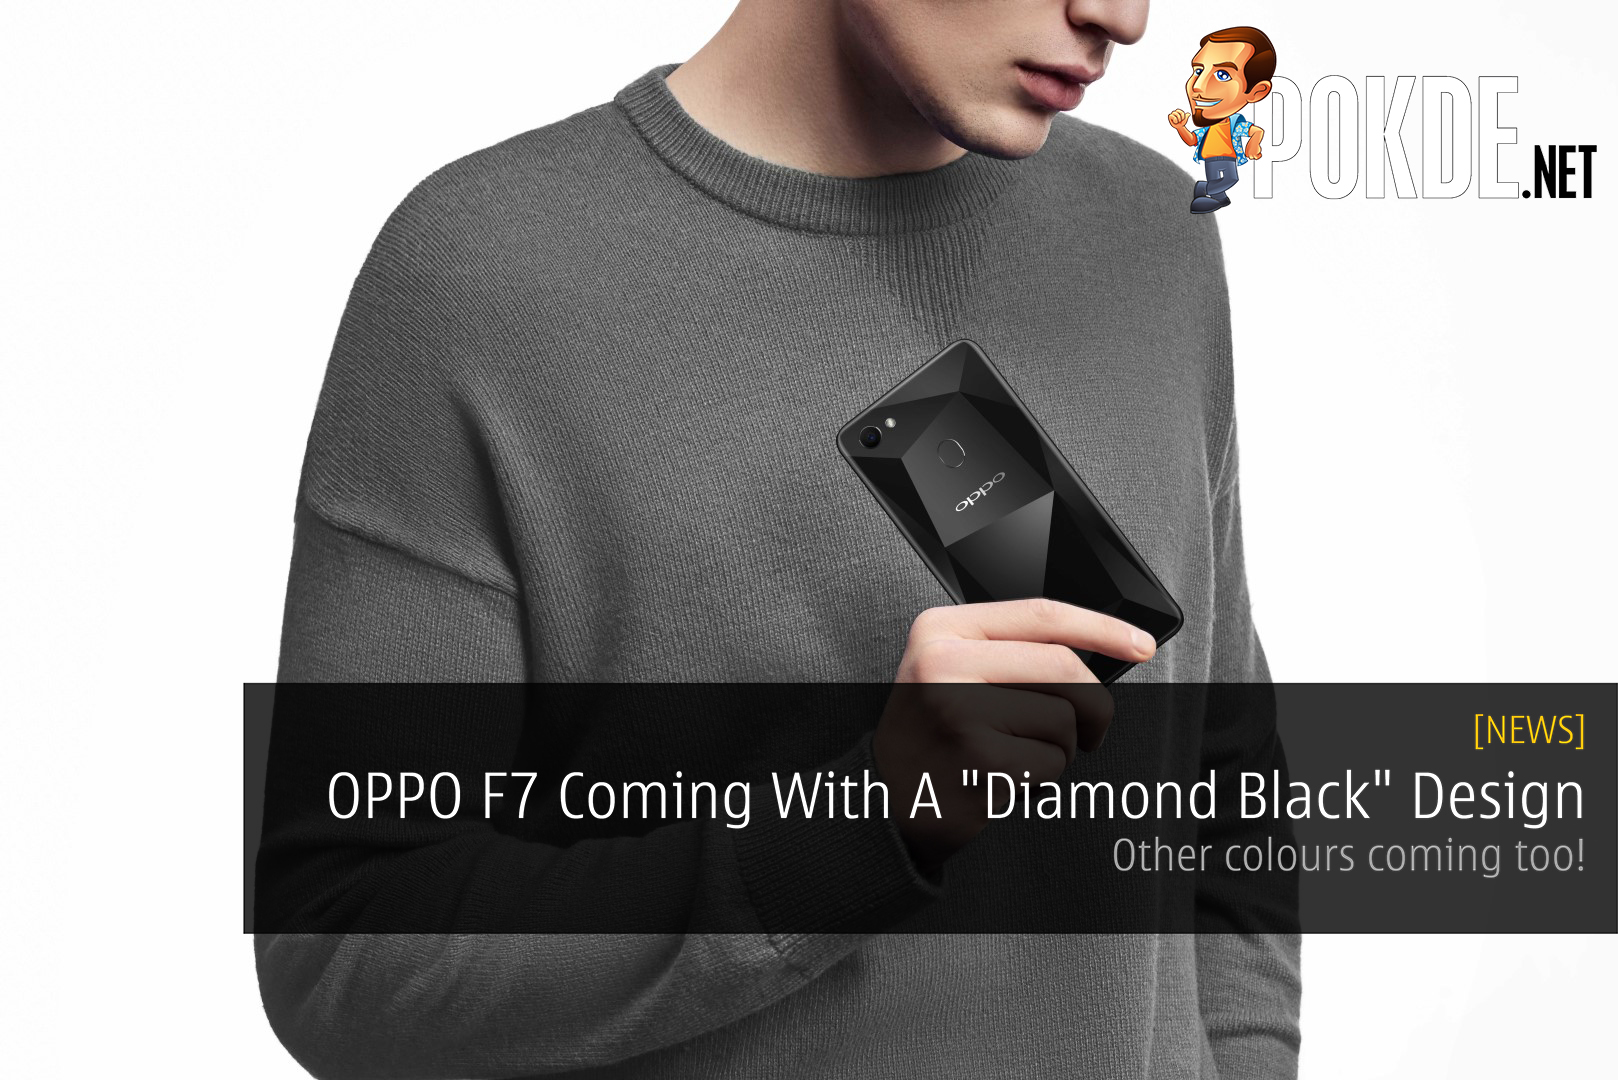 OPPO F7 Coming With A "Diamond Black" Design - Other colours coming too! 29